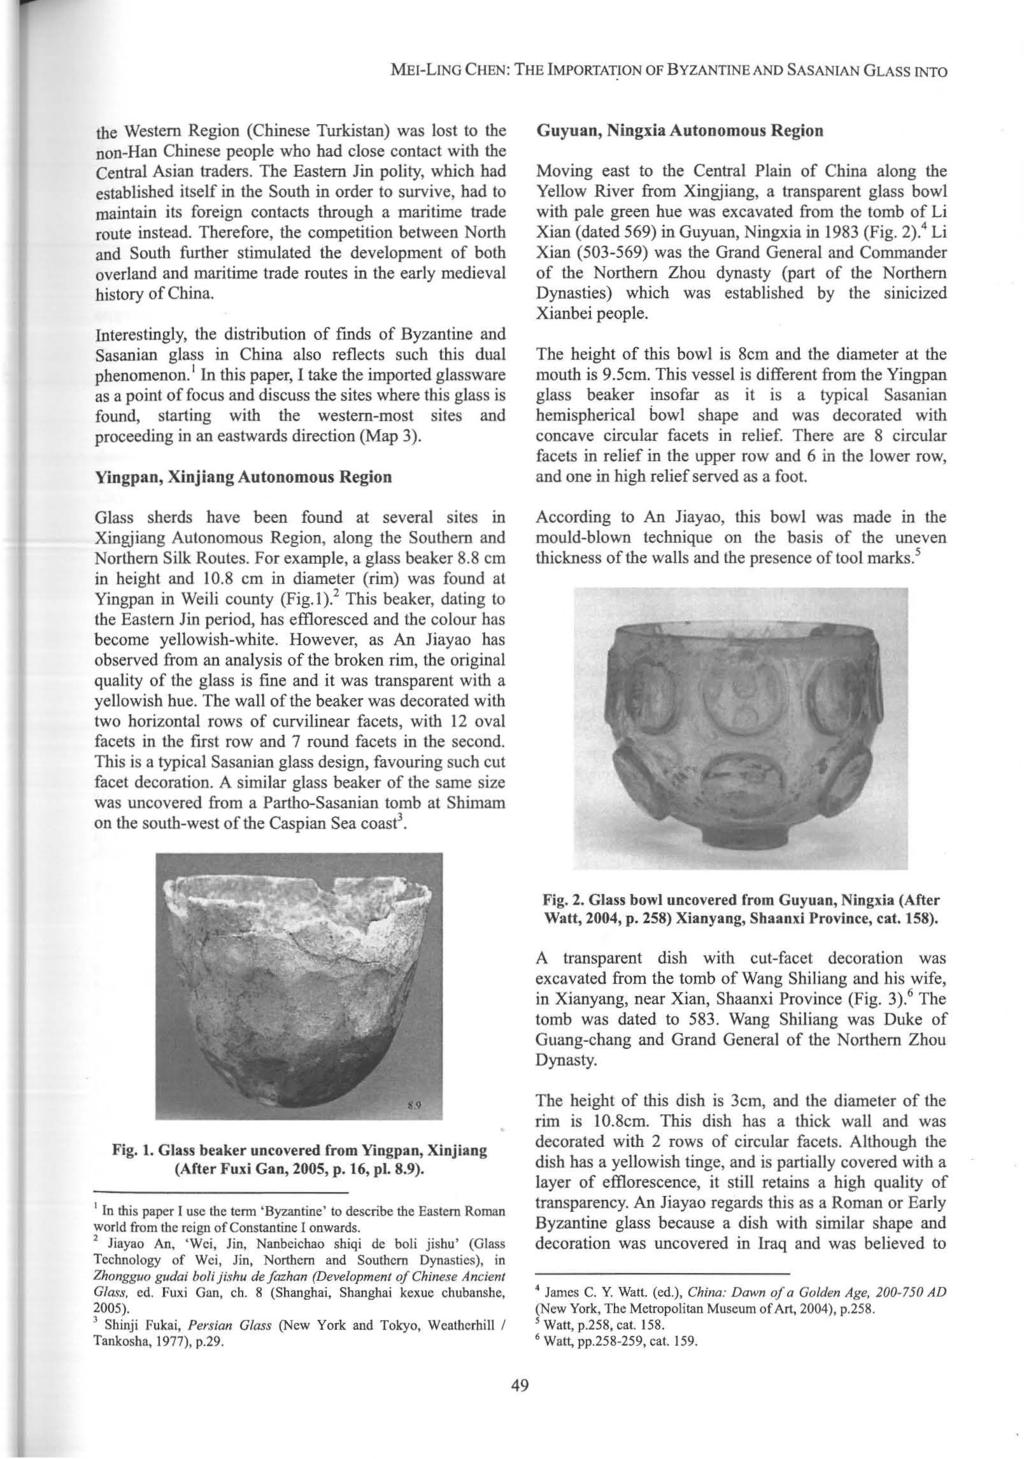 MEl-LING CHEN: THE IMPORTATION OF BYZANTINE AND SASANIAN GLASS INTO the Western Region (Chinese Turkistan) was lost to the non-han Chinese people who had close contact with the Central Asian traders.